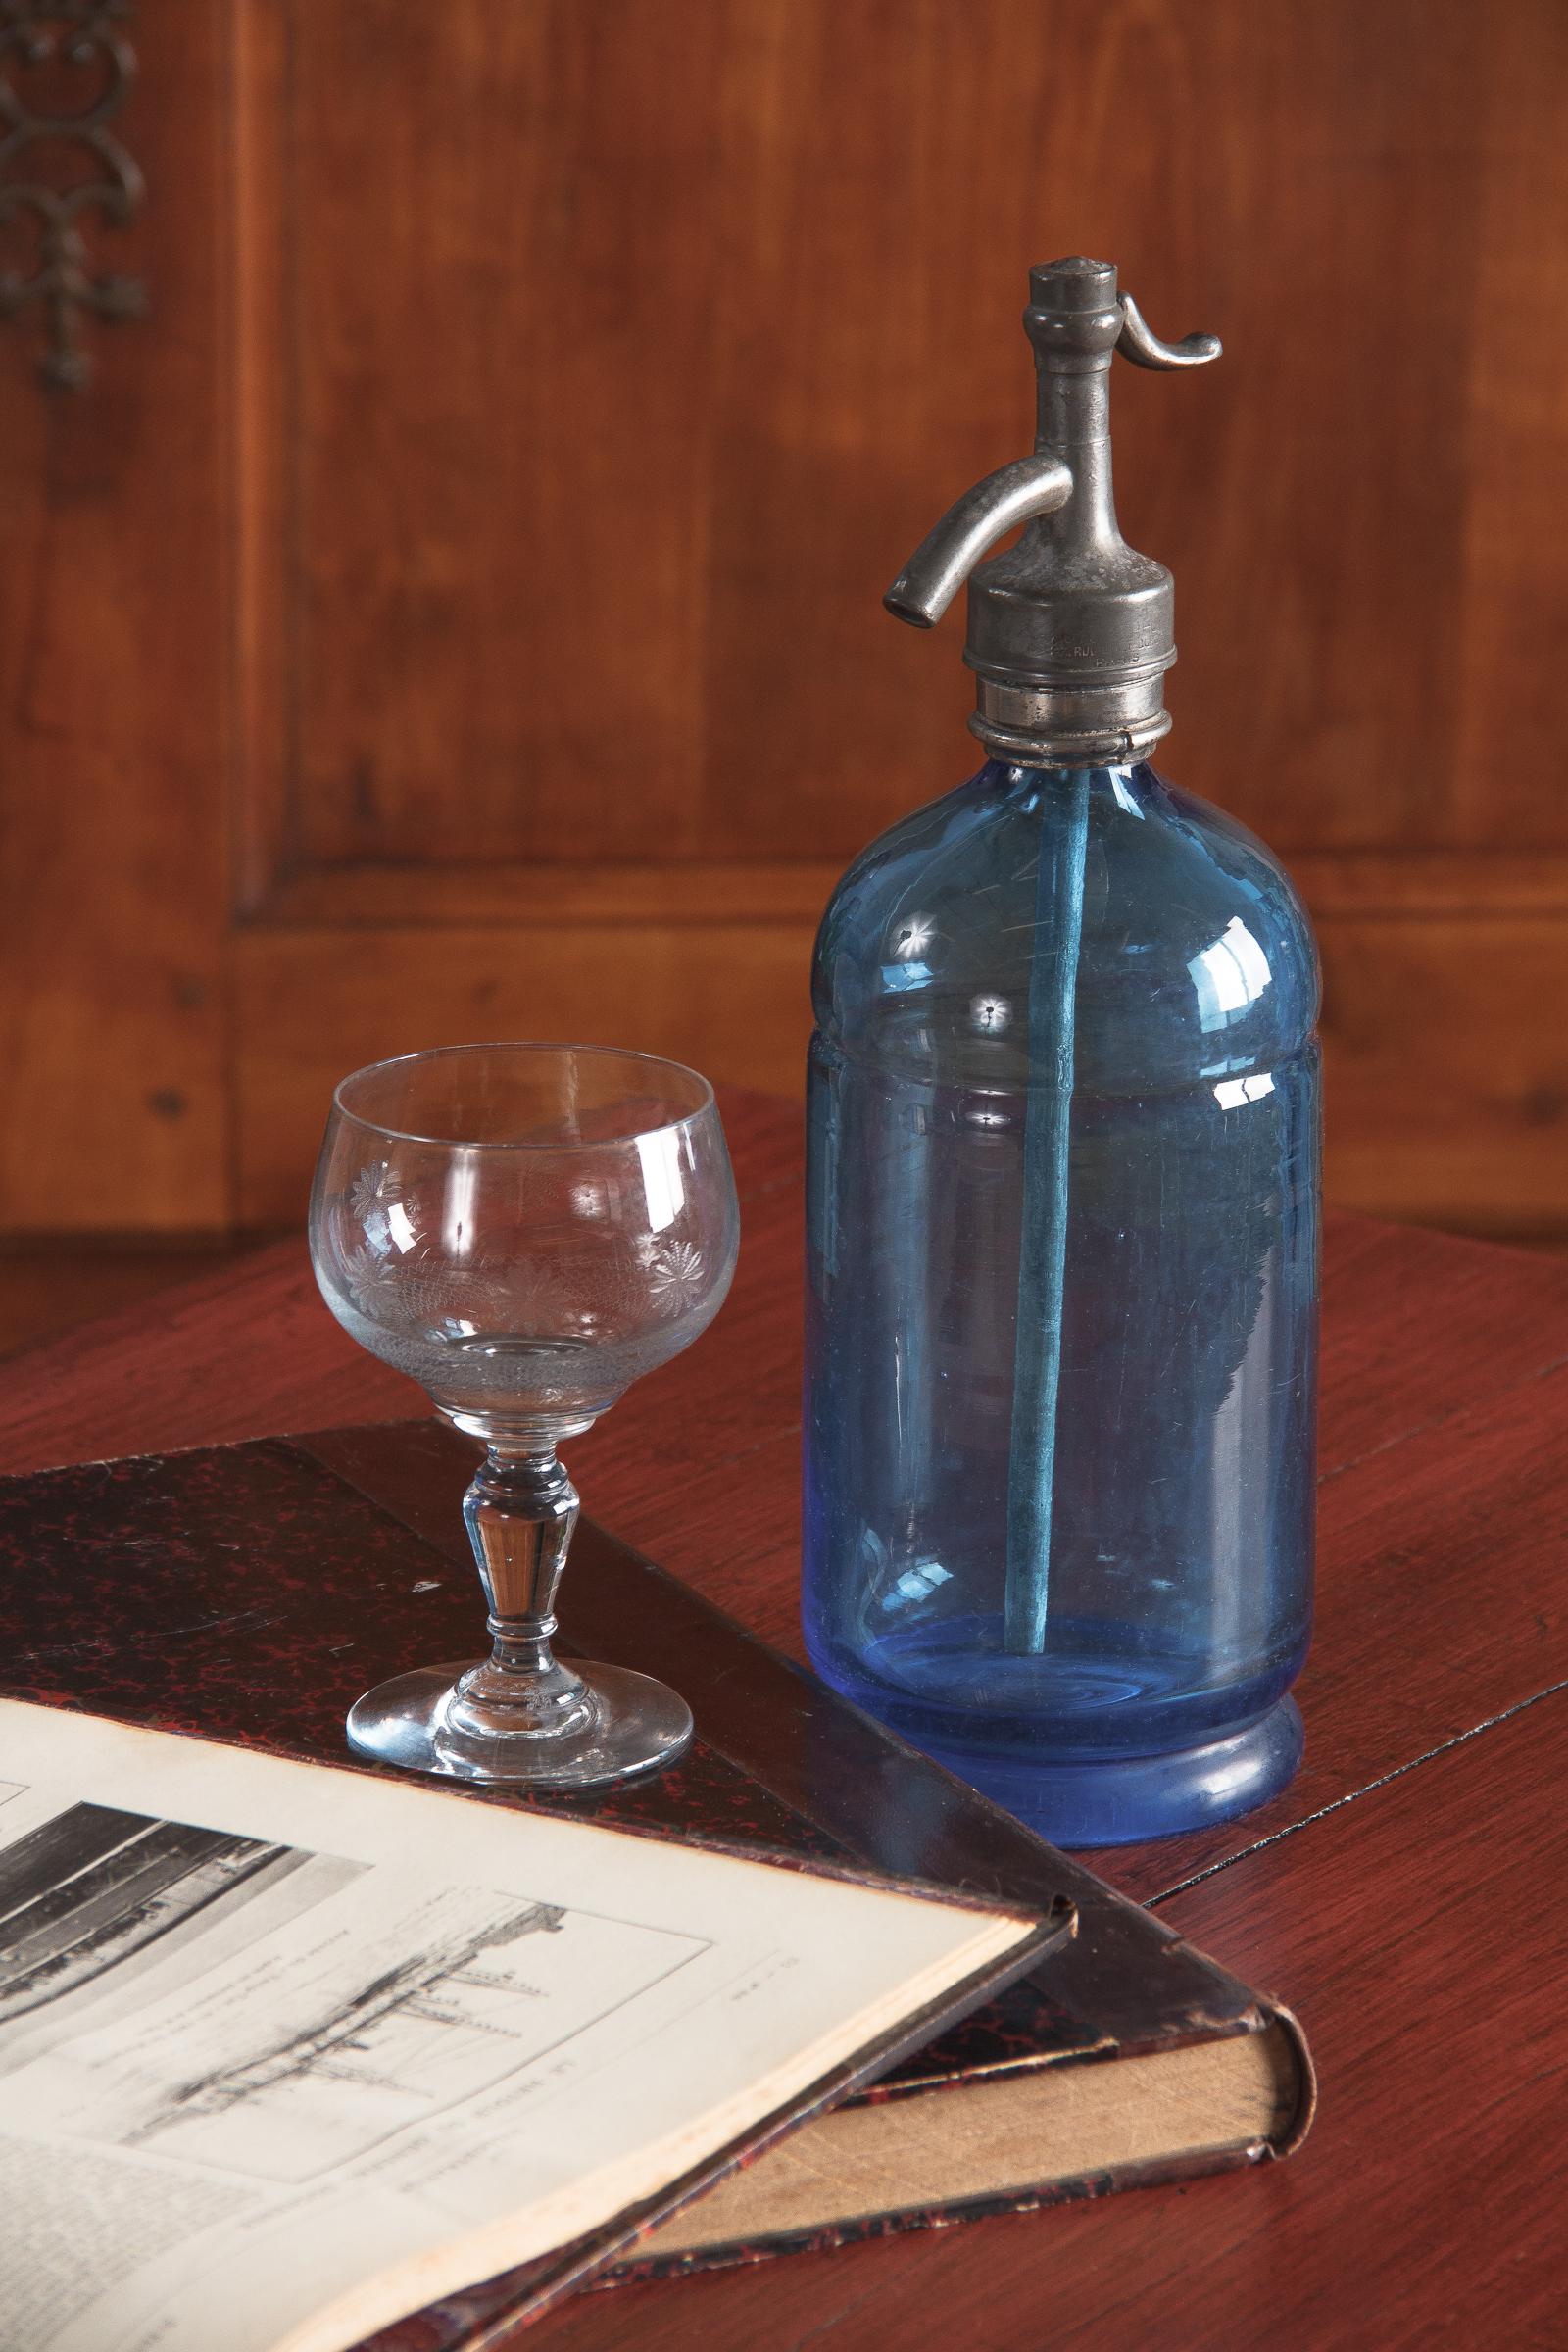 A decorative blue glass seltzer bottle from France. Thick, light blue glass bottle with subtle molding and an old metal siphon, possibly pewter. Partially worn markings on the siphon indicate a Parisian street address. Great decor piece.